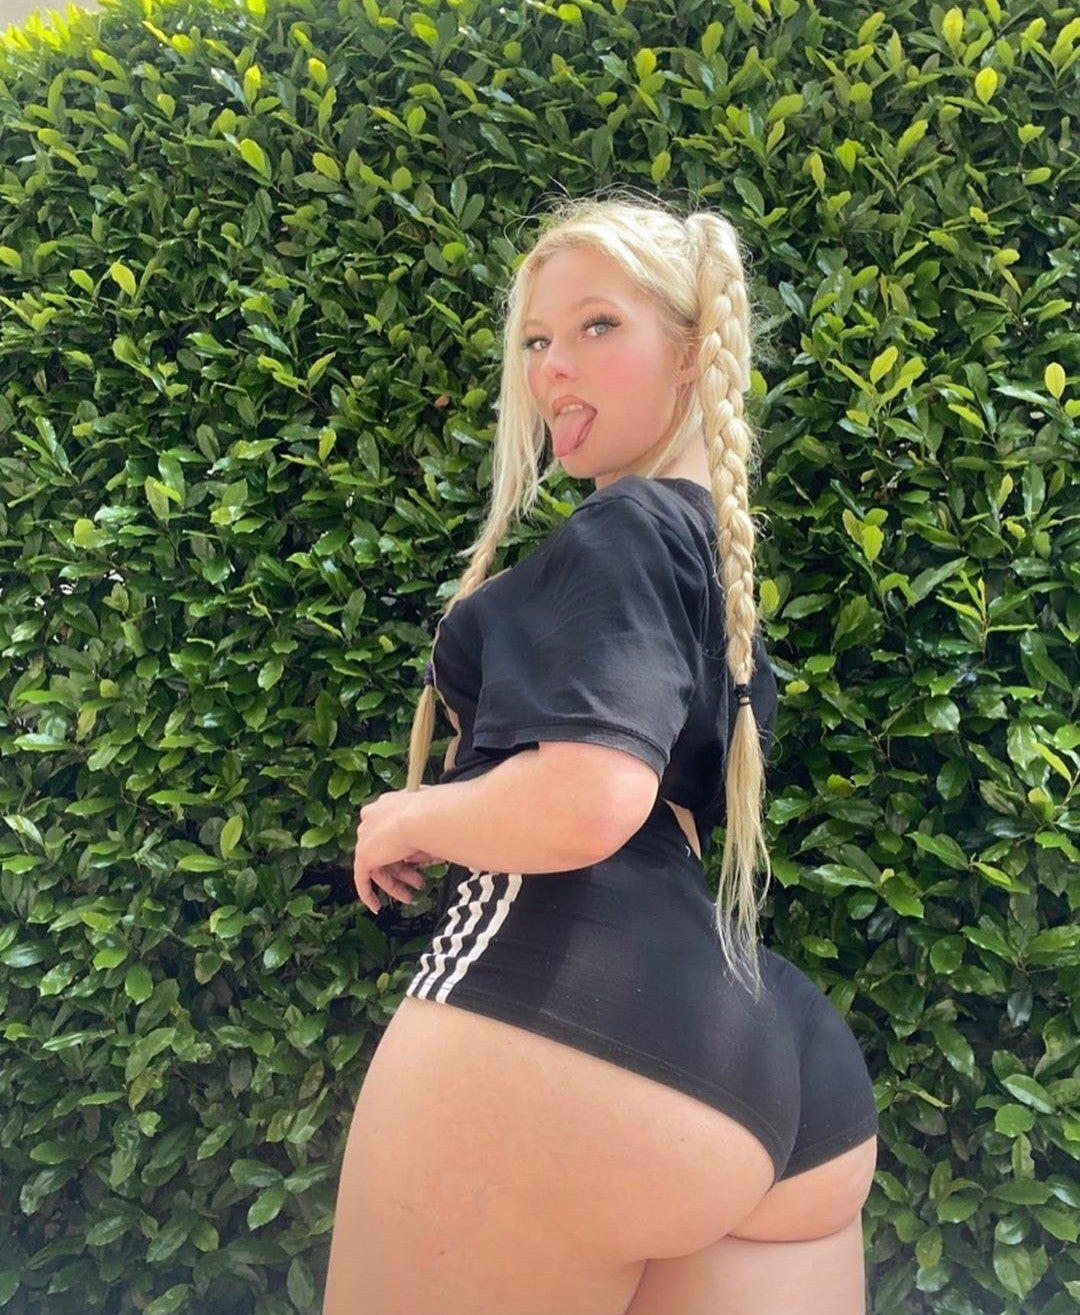 PAWG Wow